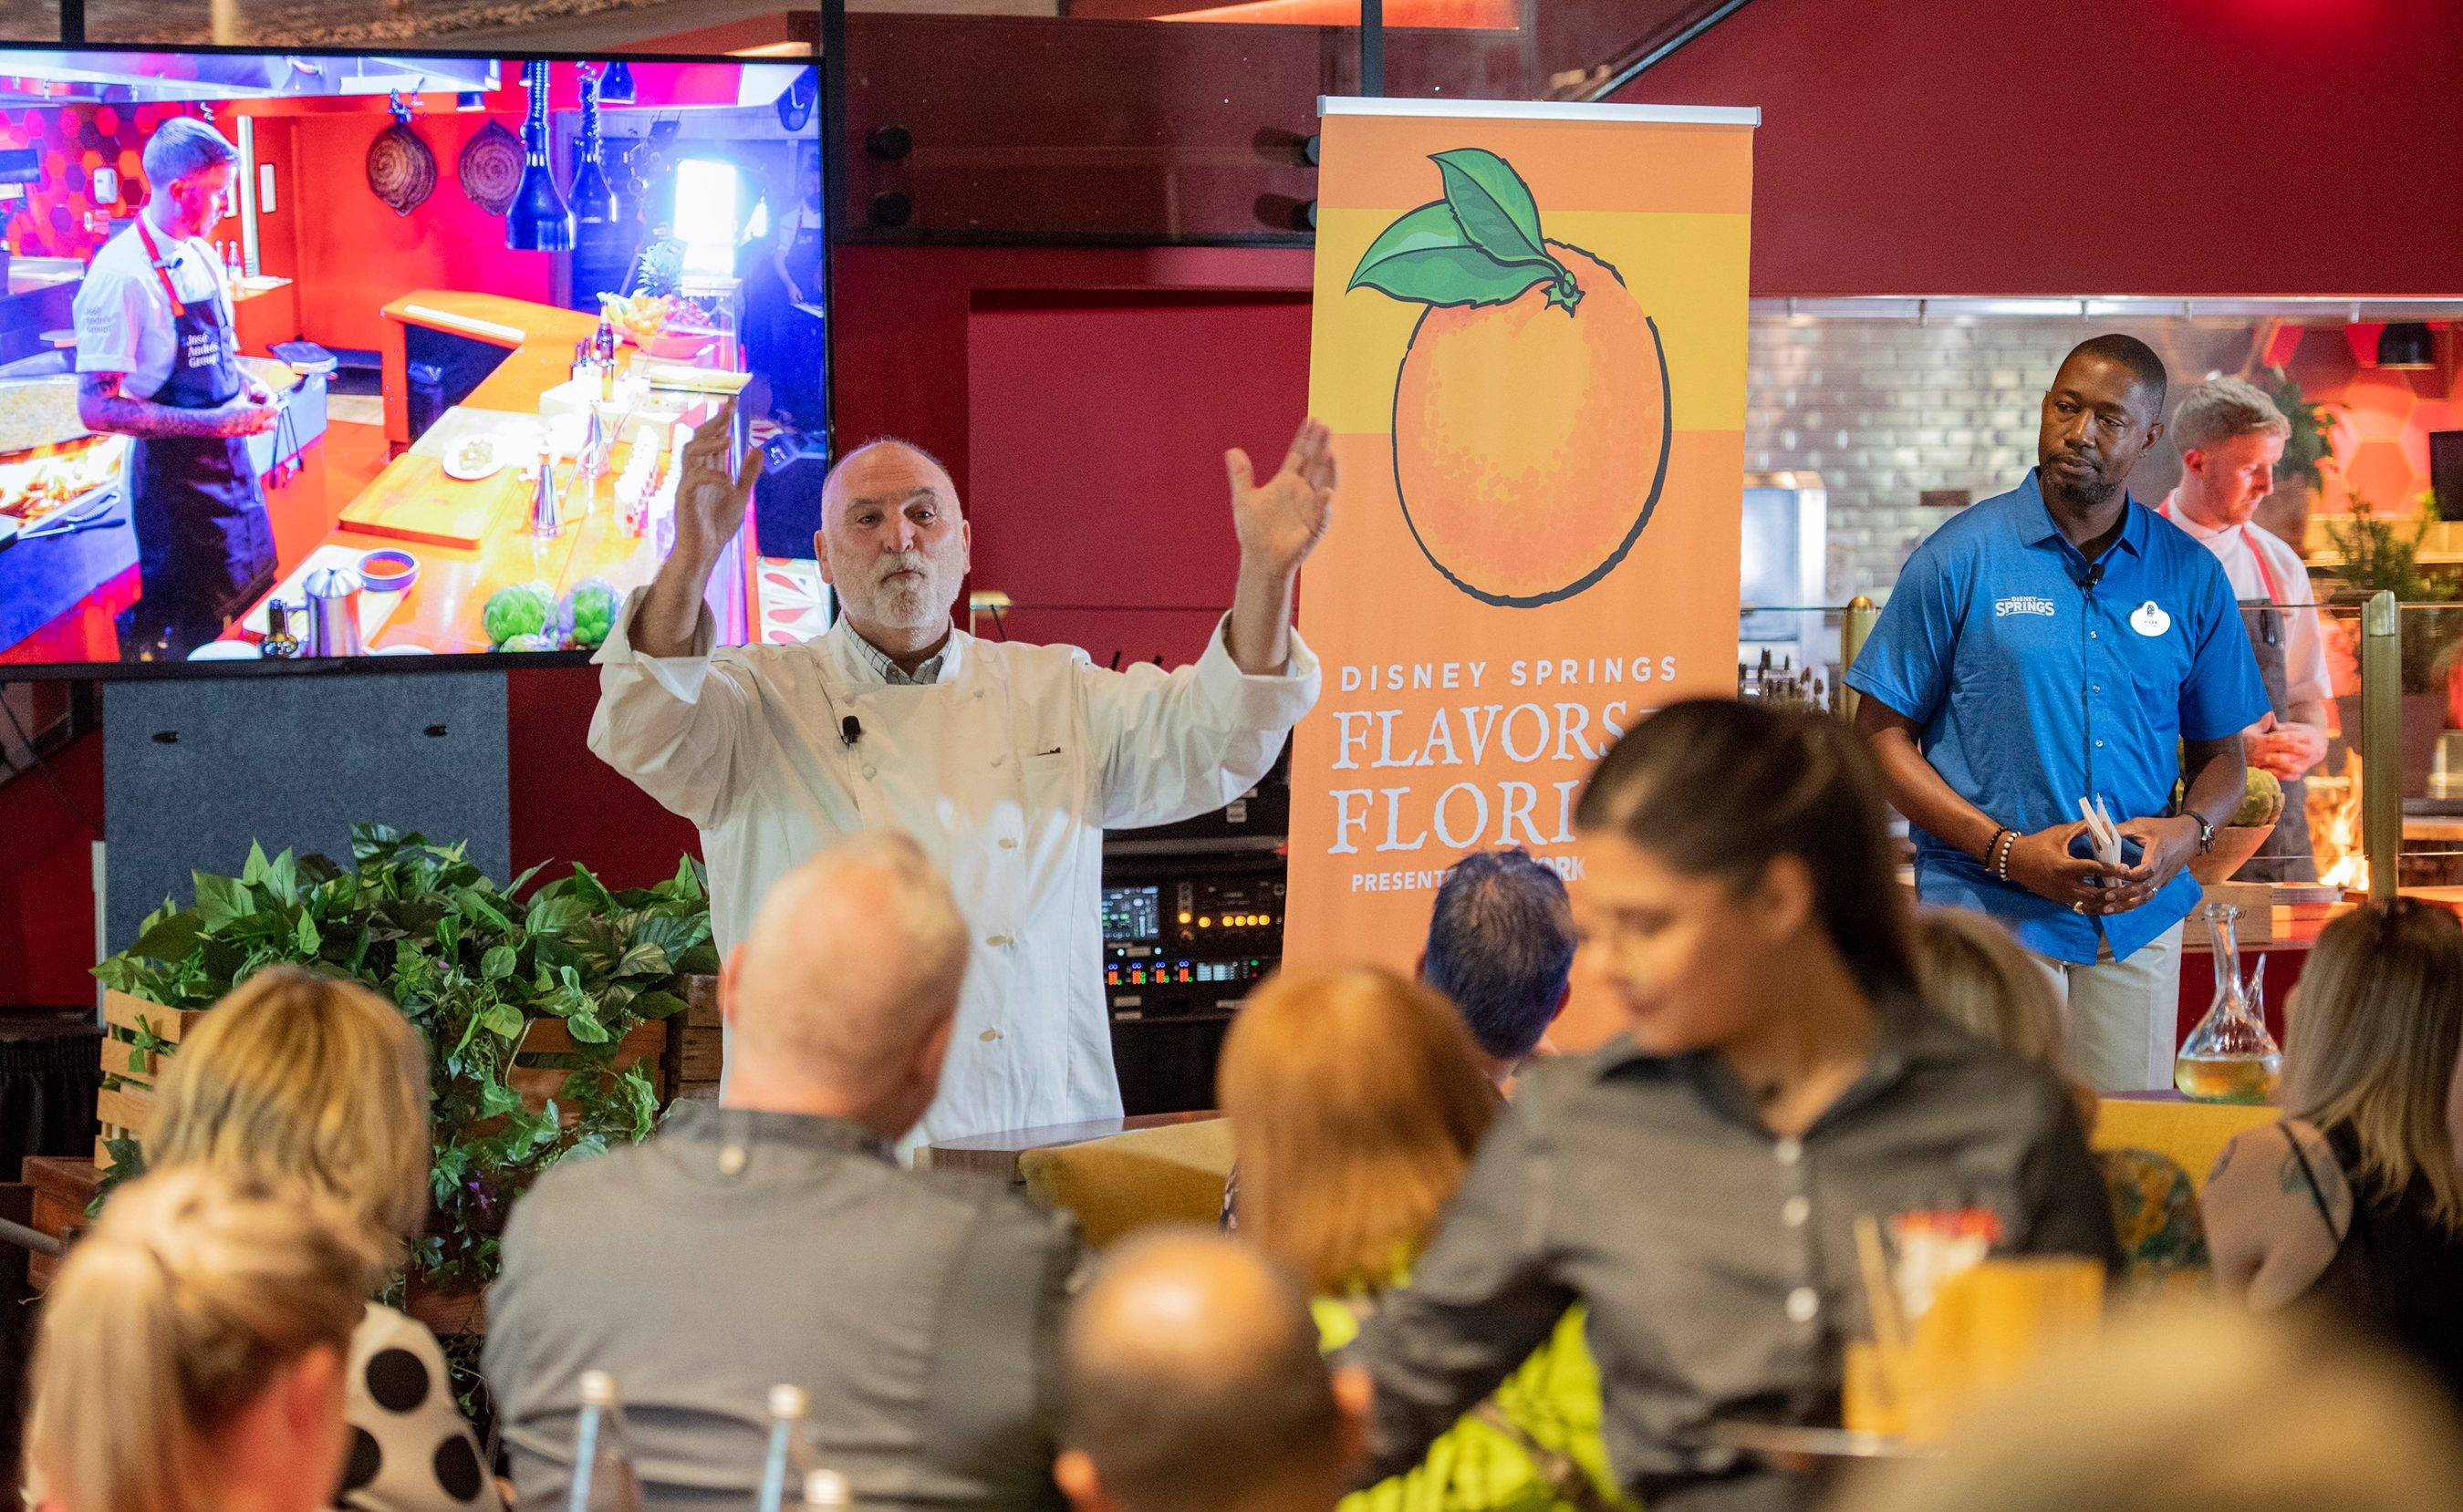 Disney Springs Flavors of Florida returns including weekly culinary series headlined by internationally recognized chefs 